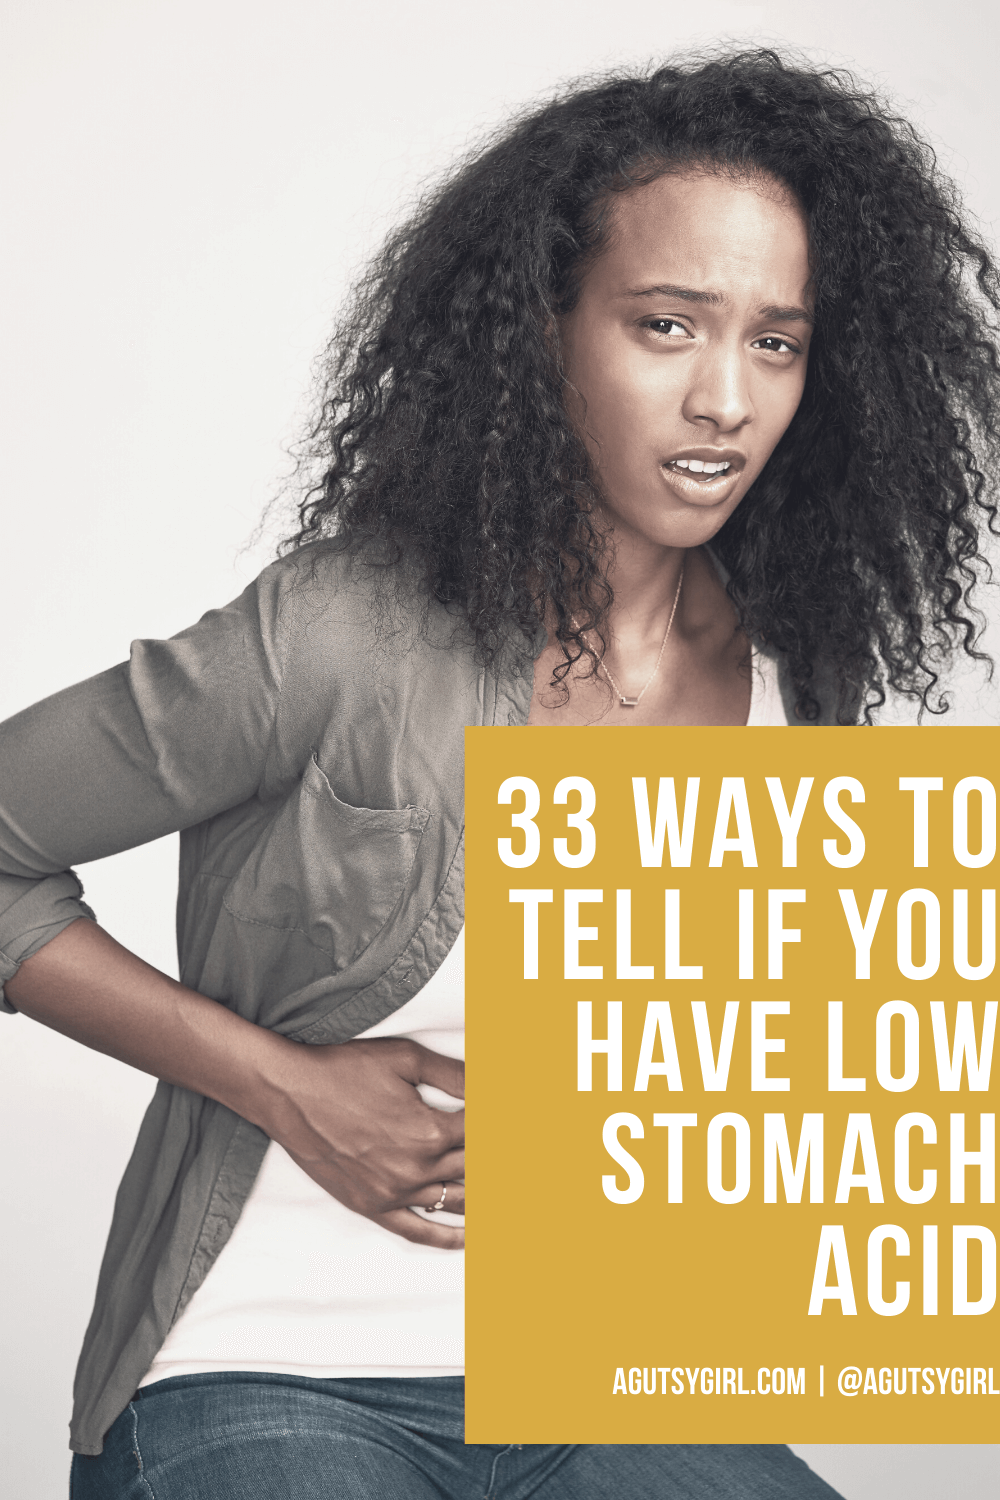 33 Ways to Tell if You Have Low Stomach Acid agutsygirl.com #stomachacid #bloatedbelly #guthealth #reflux